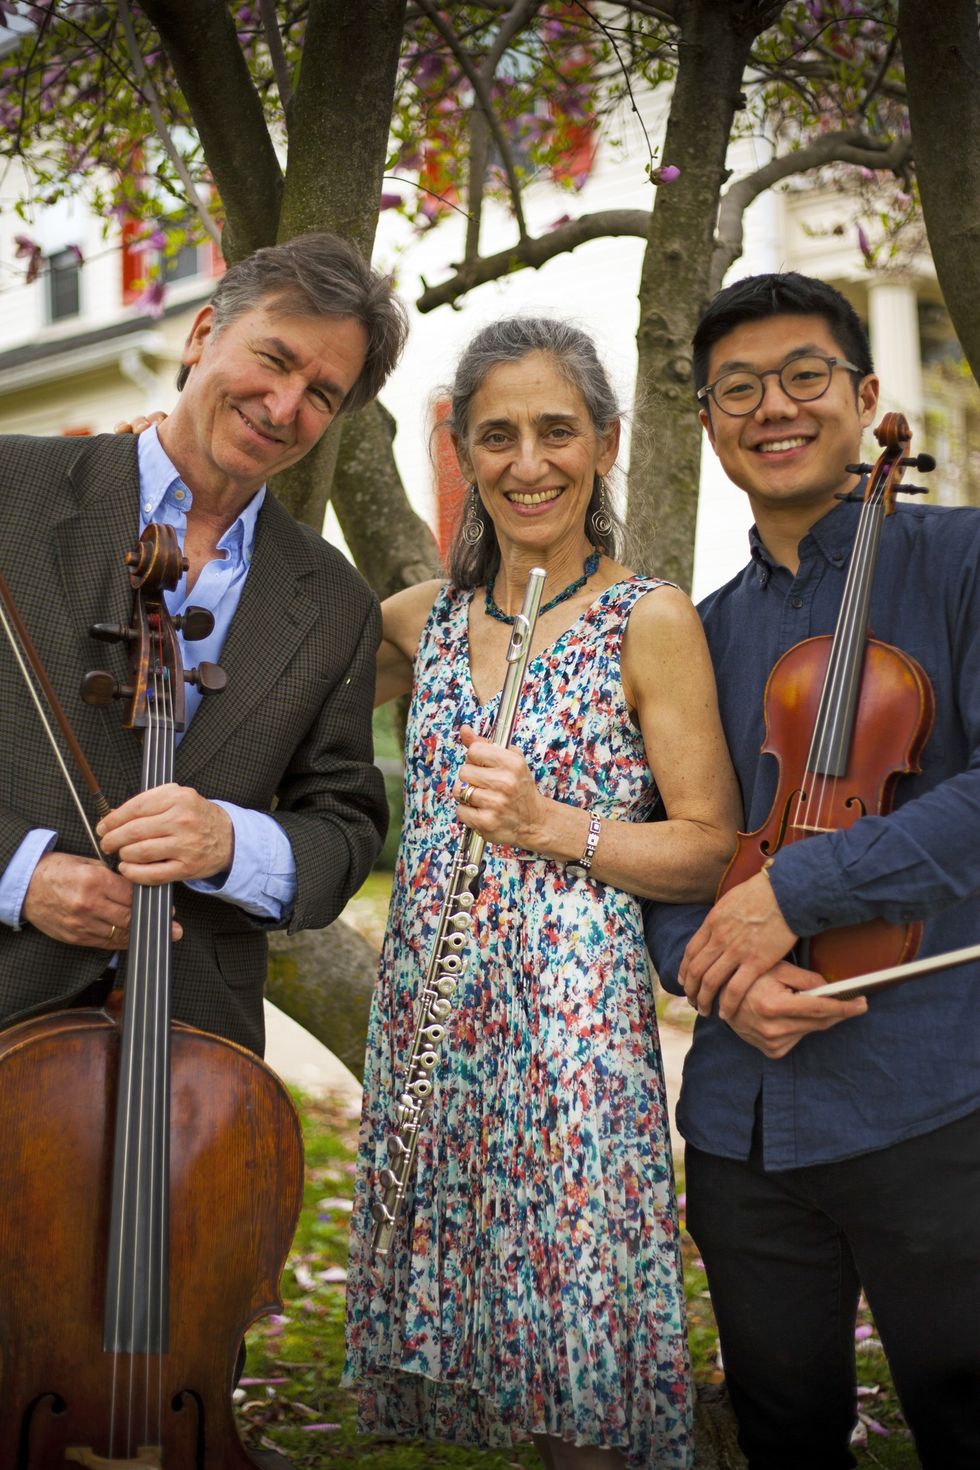 Chamber Music, Outdoors, in August